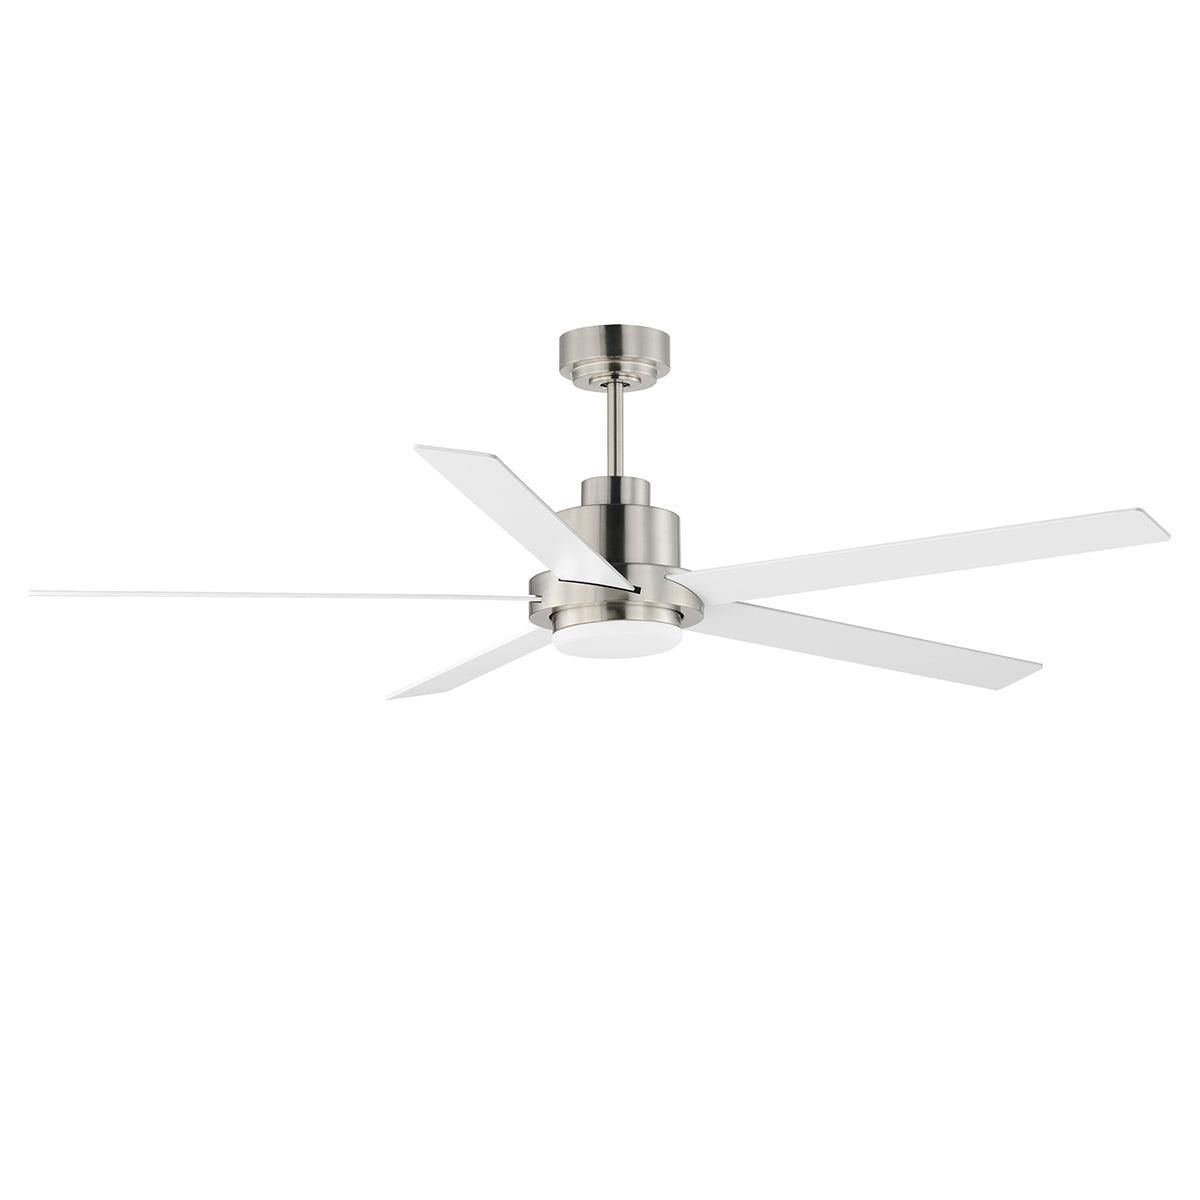 Daisy 60 Inch 5-Blade Ceiling Fan With Light and Wall Control, White,Satin Nickel with White/Walnut Blades - Bees Lighting